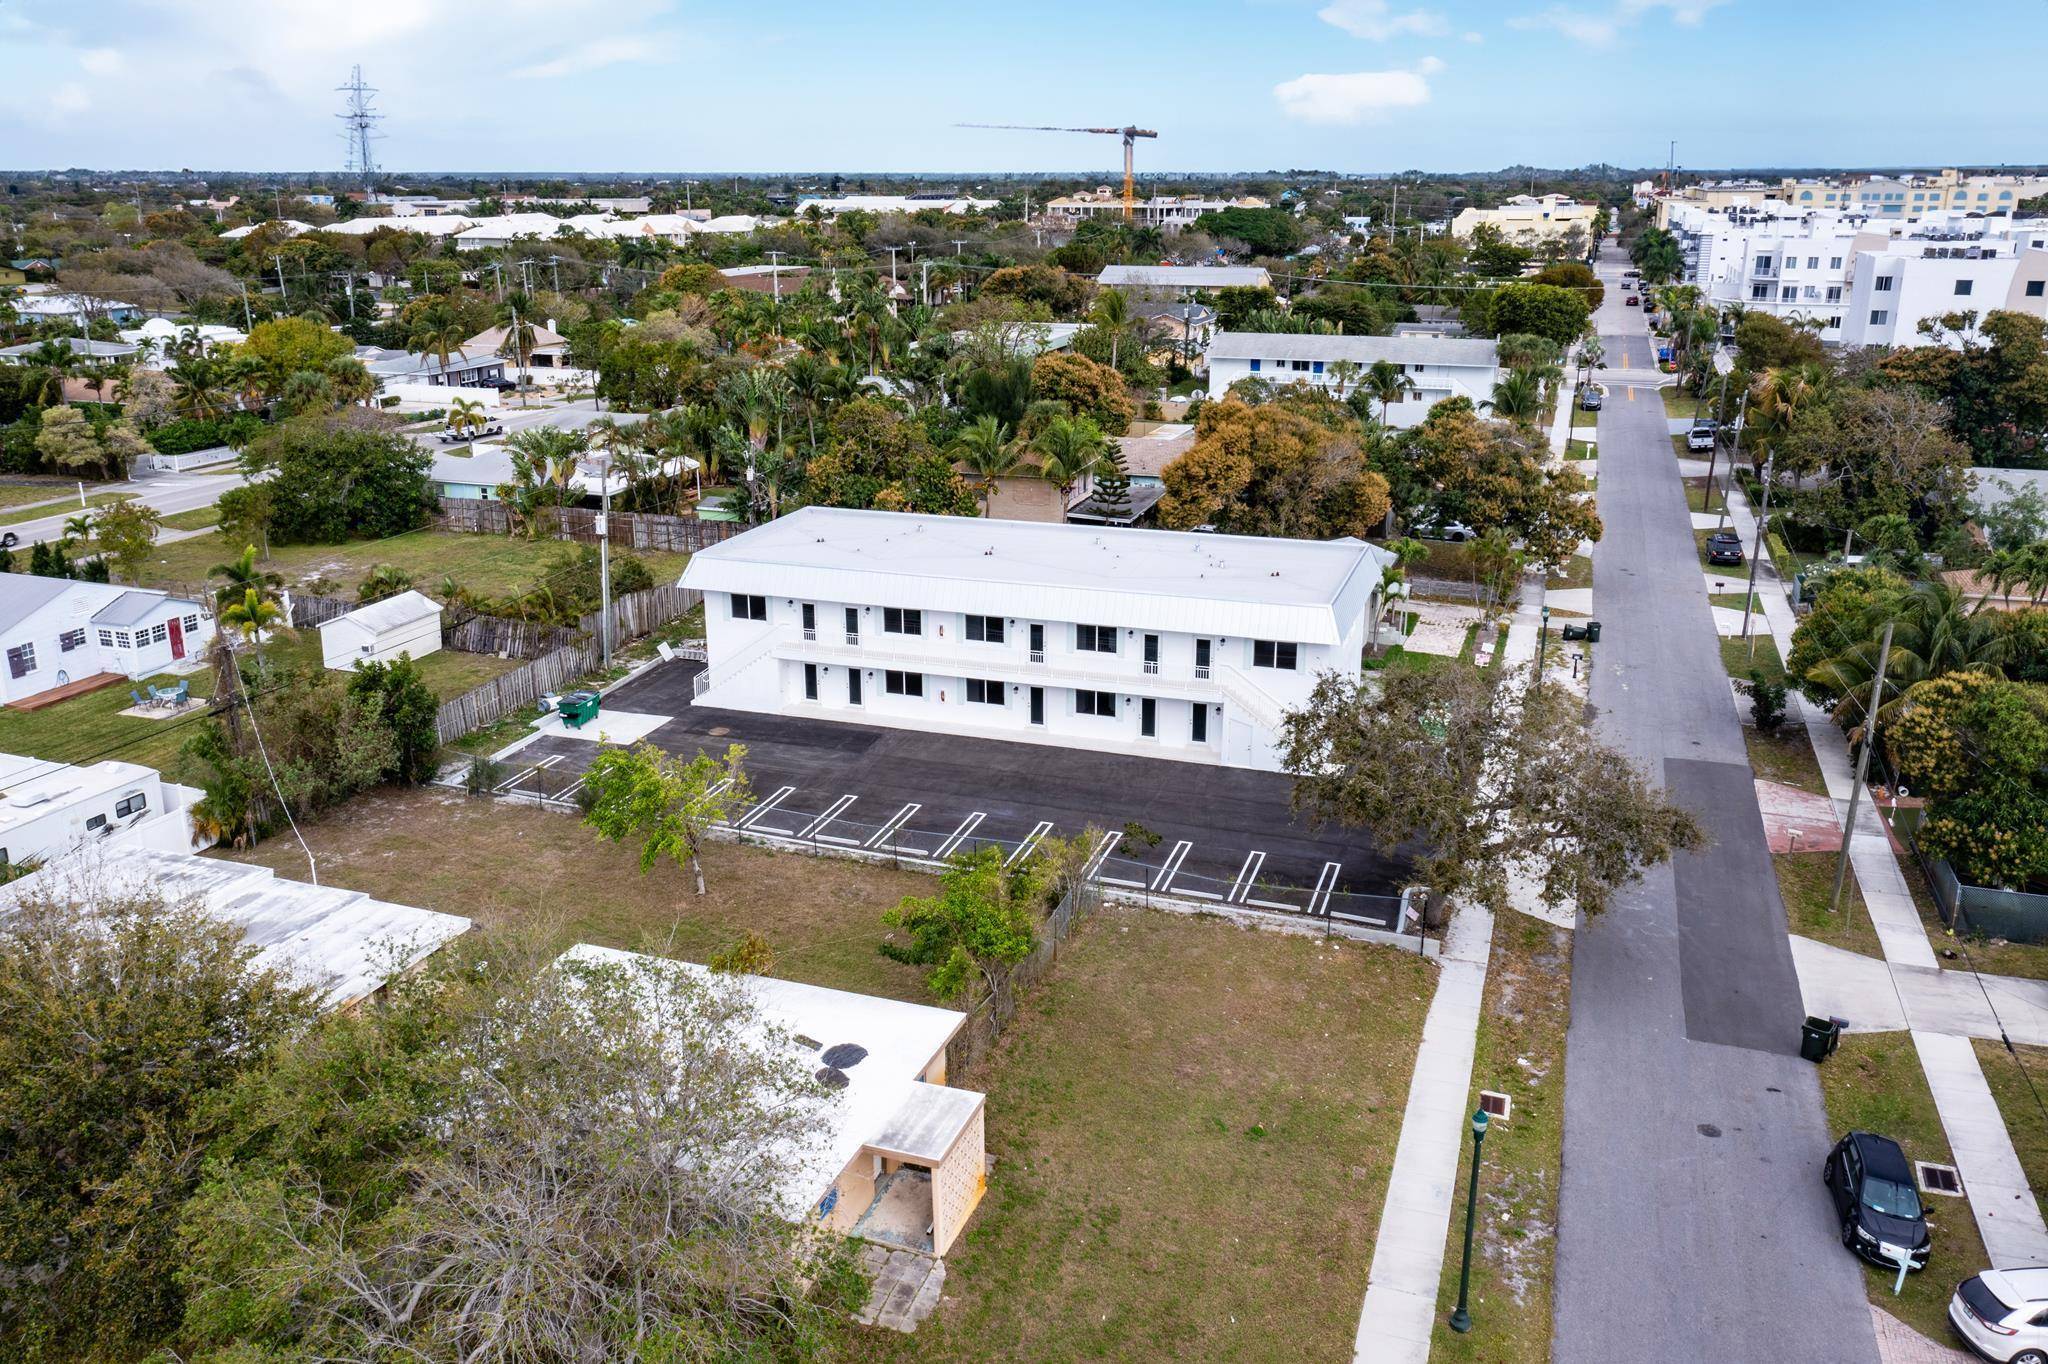 10 unit, 2 story fully renovated 2004 apartment building in a very desirable location in Delray Beach, FL.